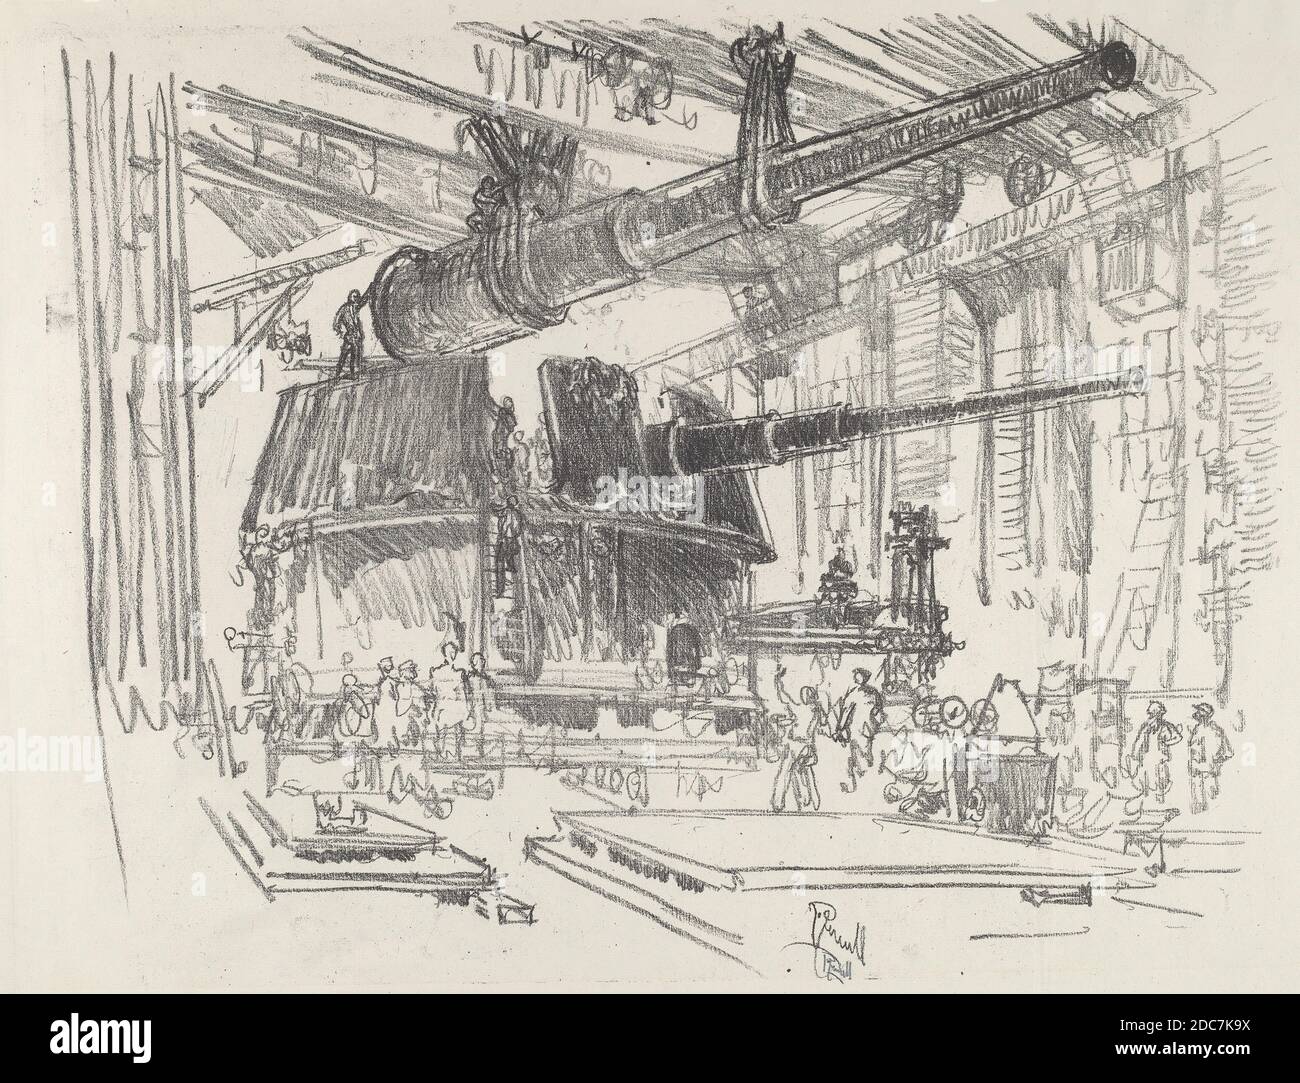 Joseph Pennell, (artist), American, 1857 - 1926, Fitting Guns in Turrets, English War Work, (series), 1916, lithograph Stock Photo